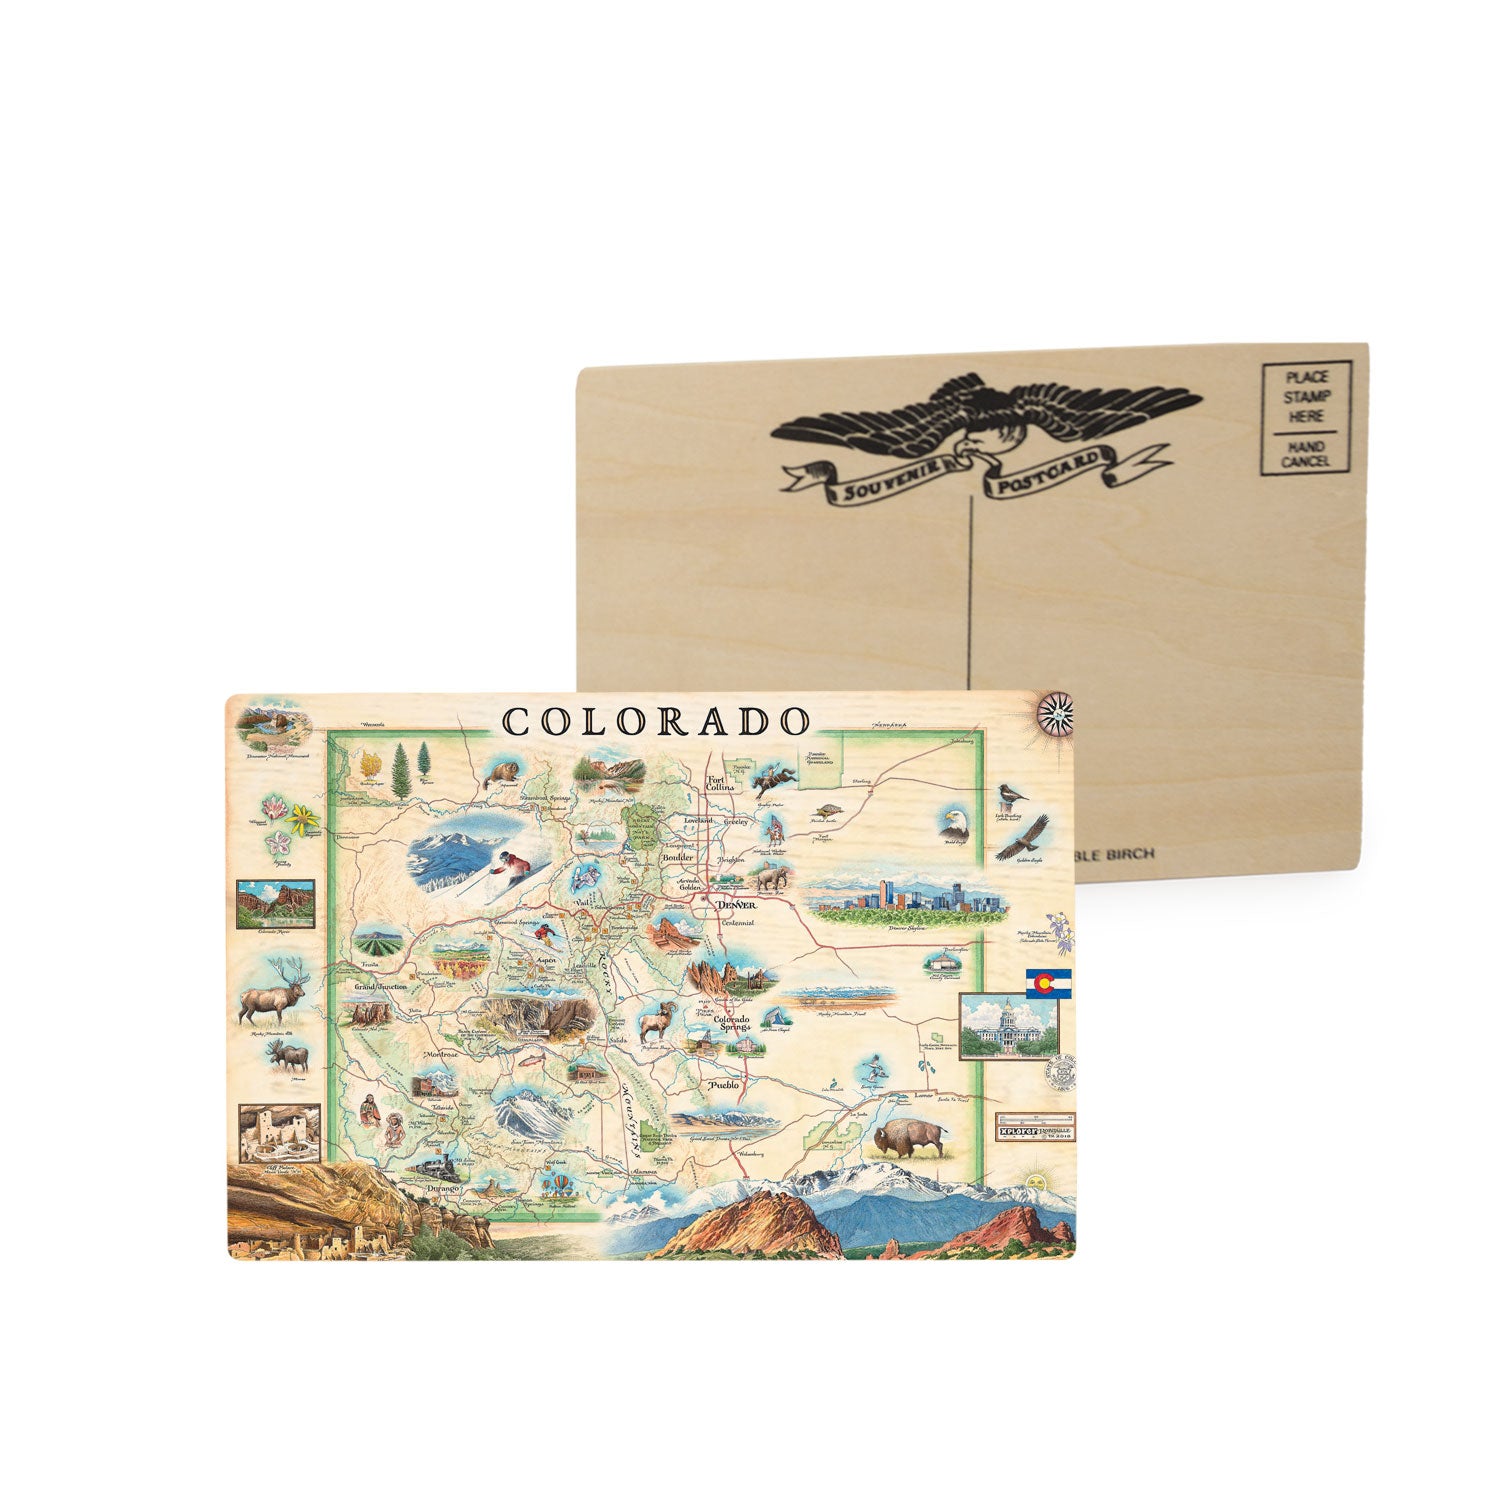 Colorado State Map Wooden Postcard  4